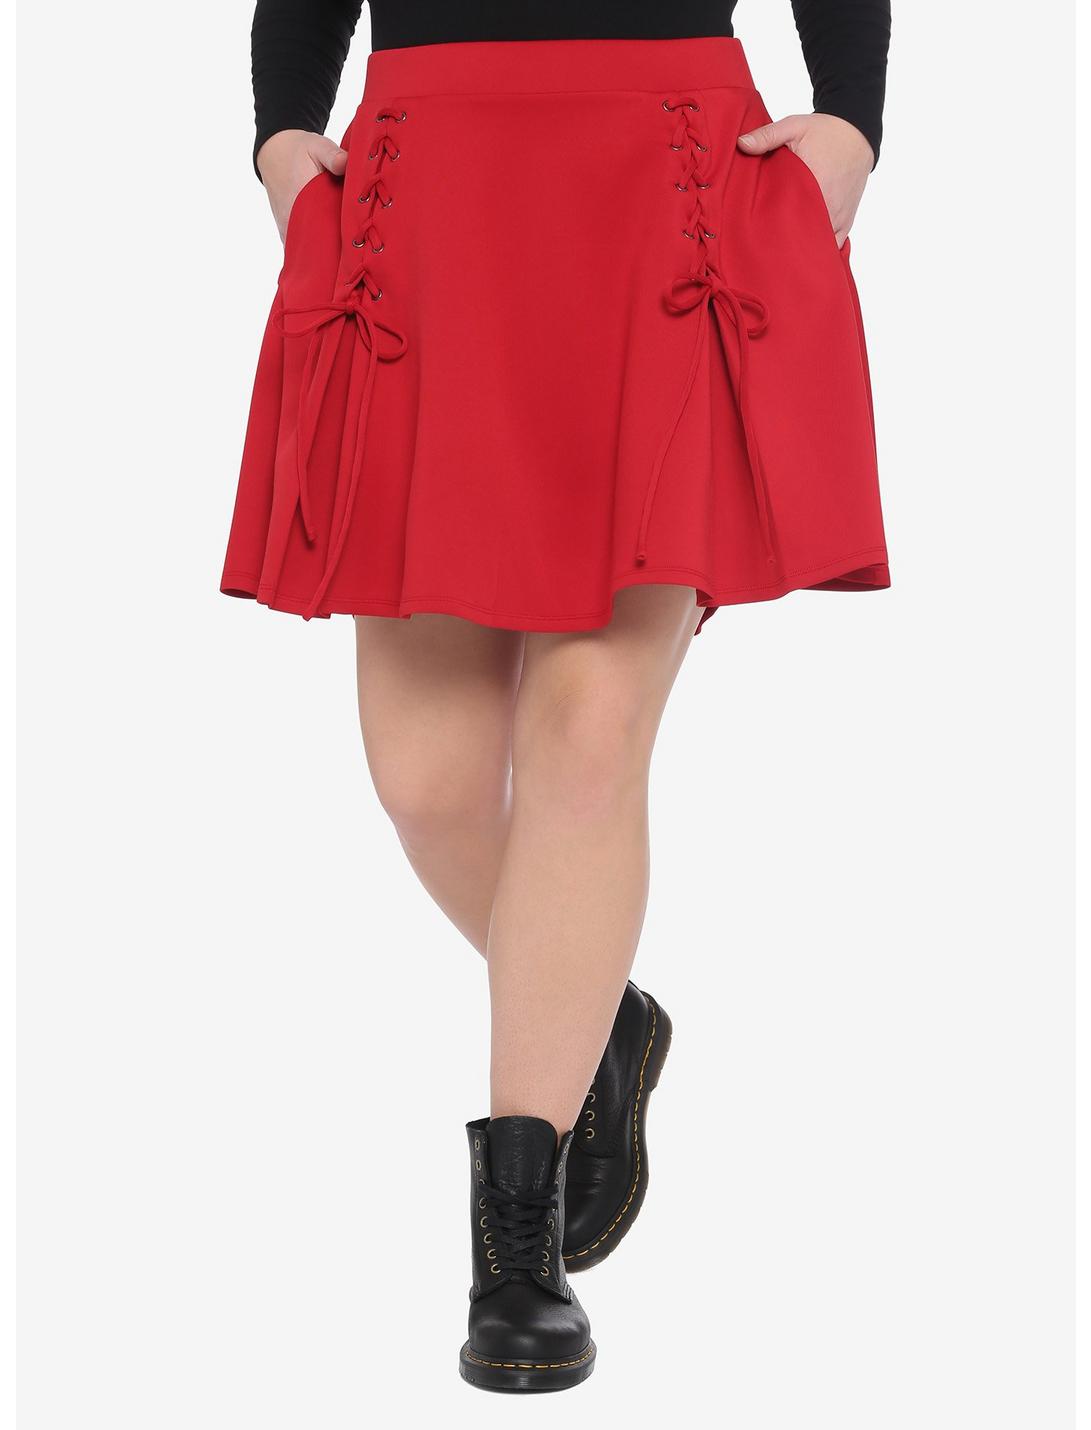 Red Lace-Up Skater Skirt Plus Size, RED, hi-res